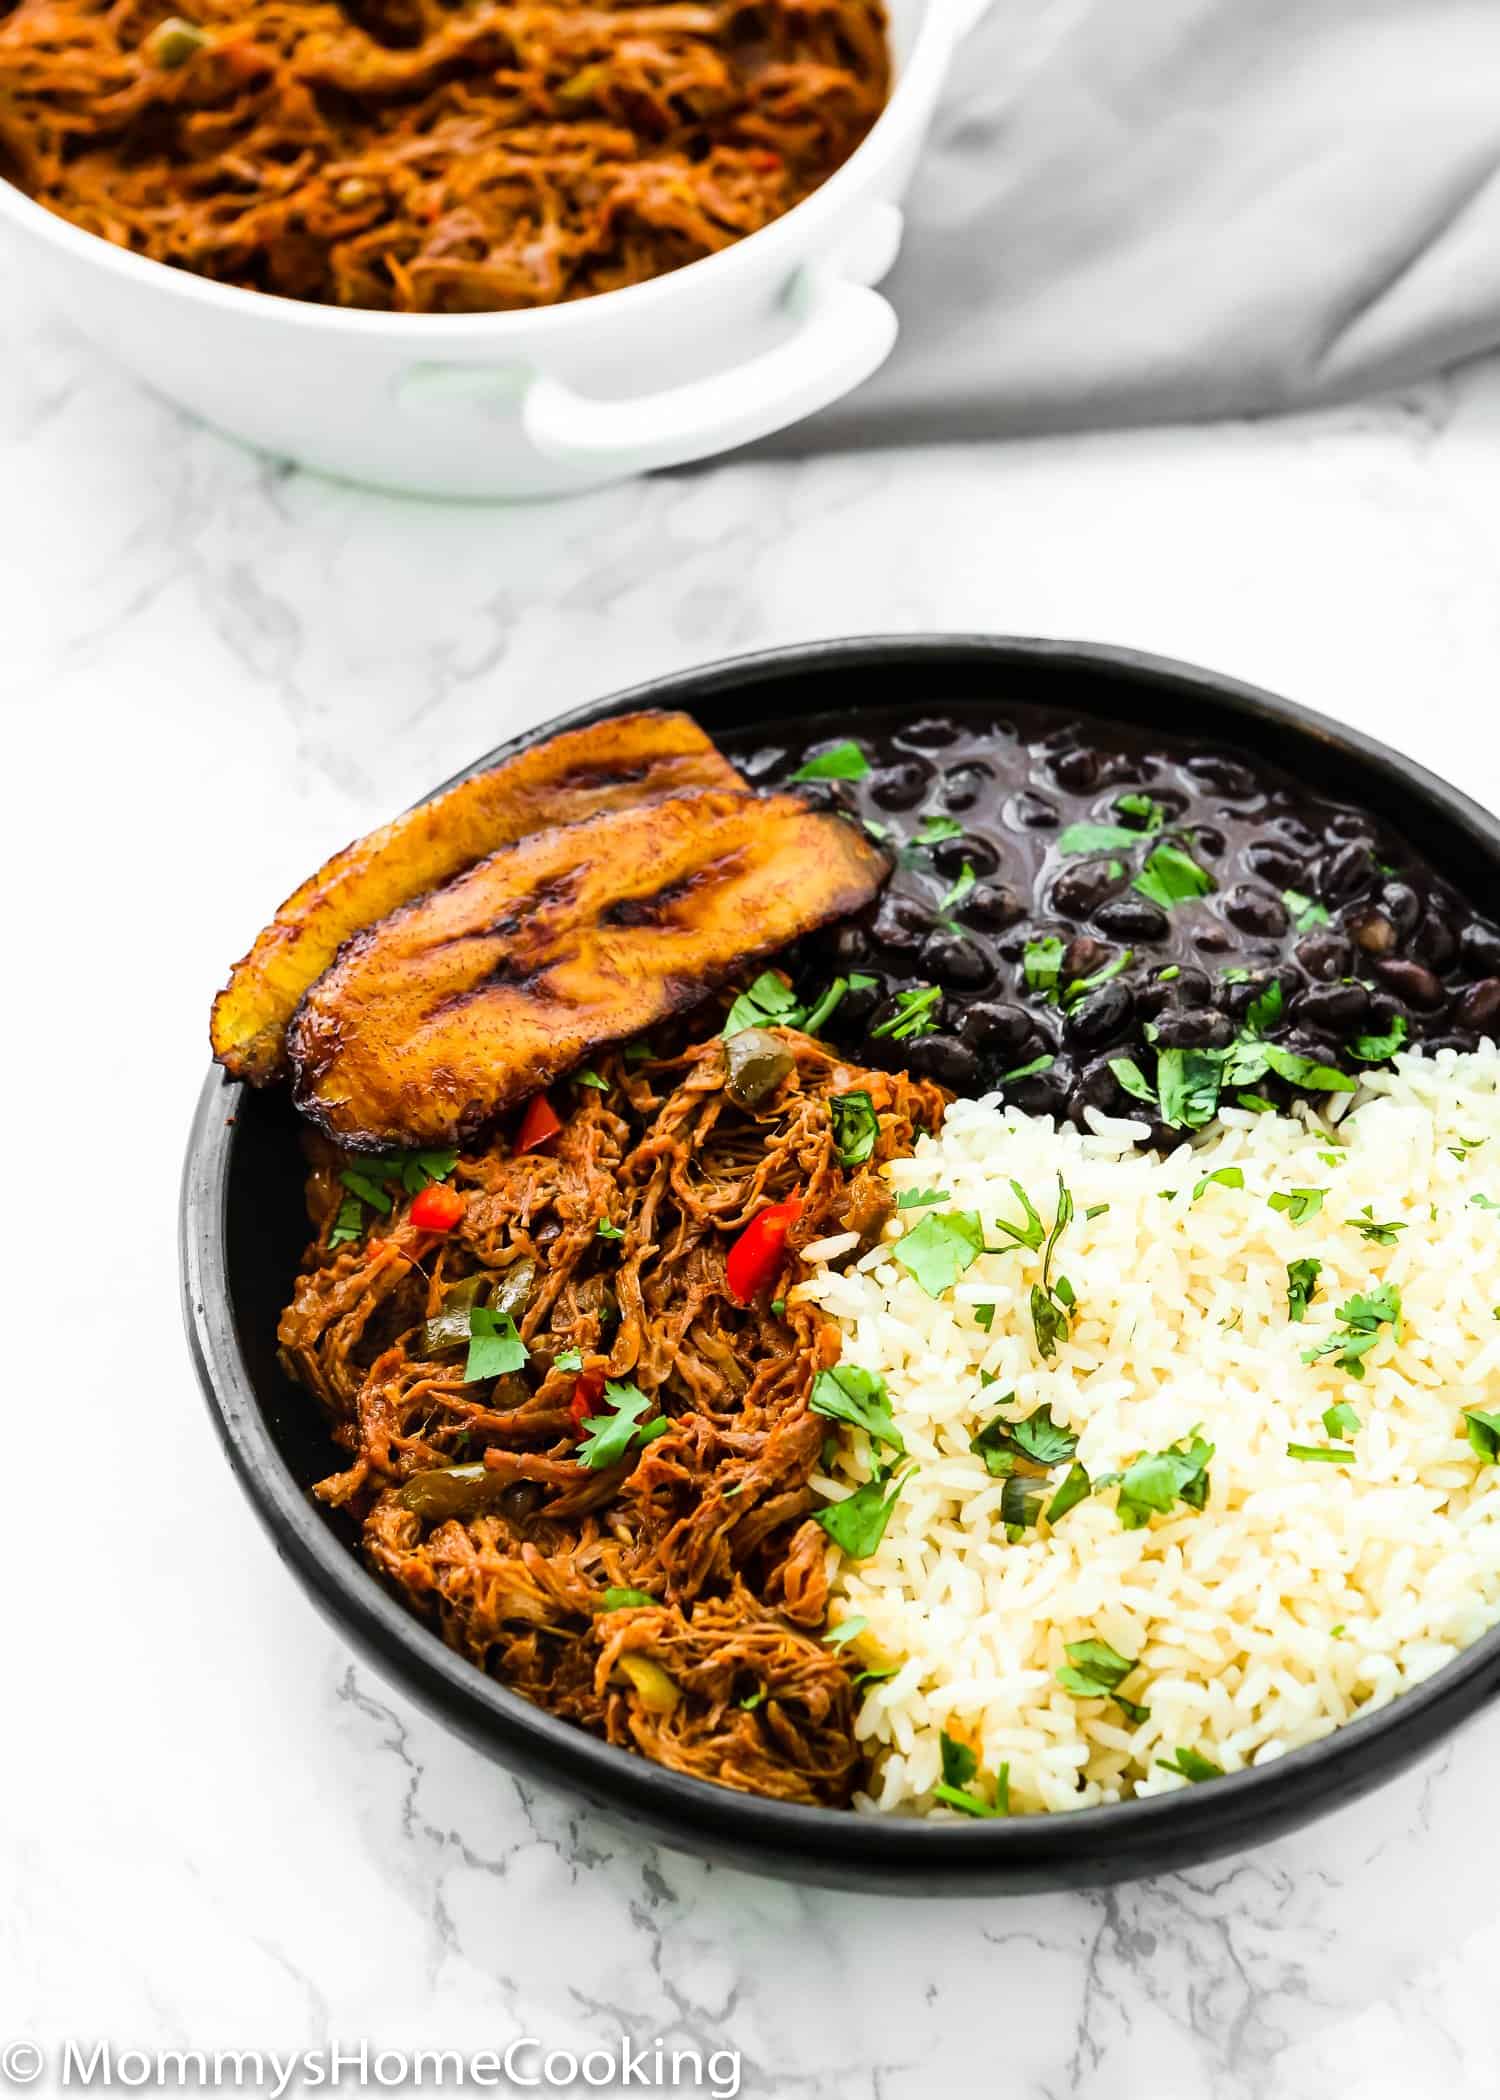 Venezuelan Shredded Beef on a plate with beans and rice for Pabellon Criollo.